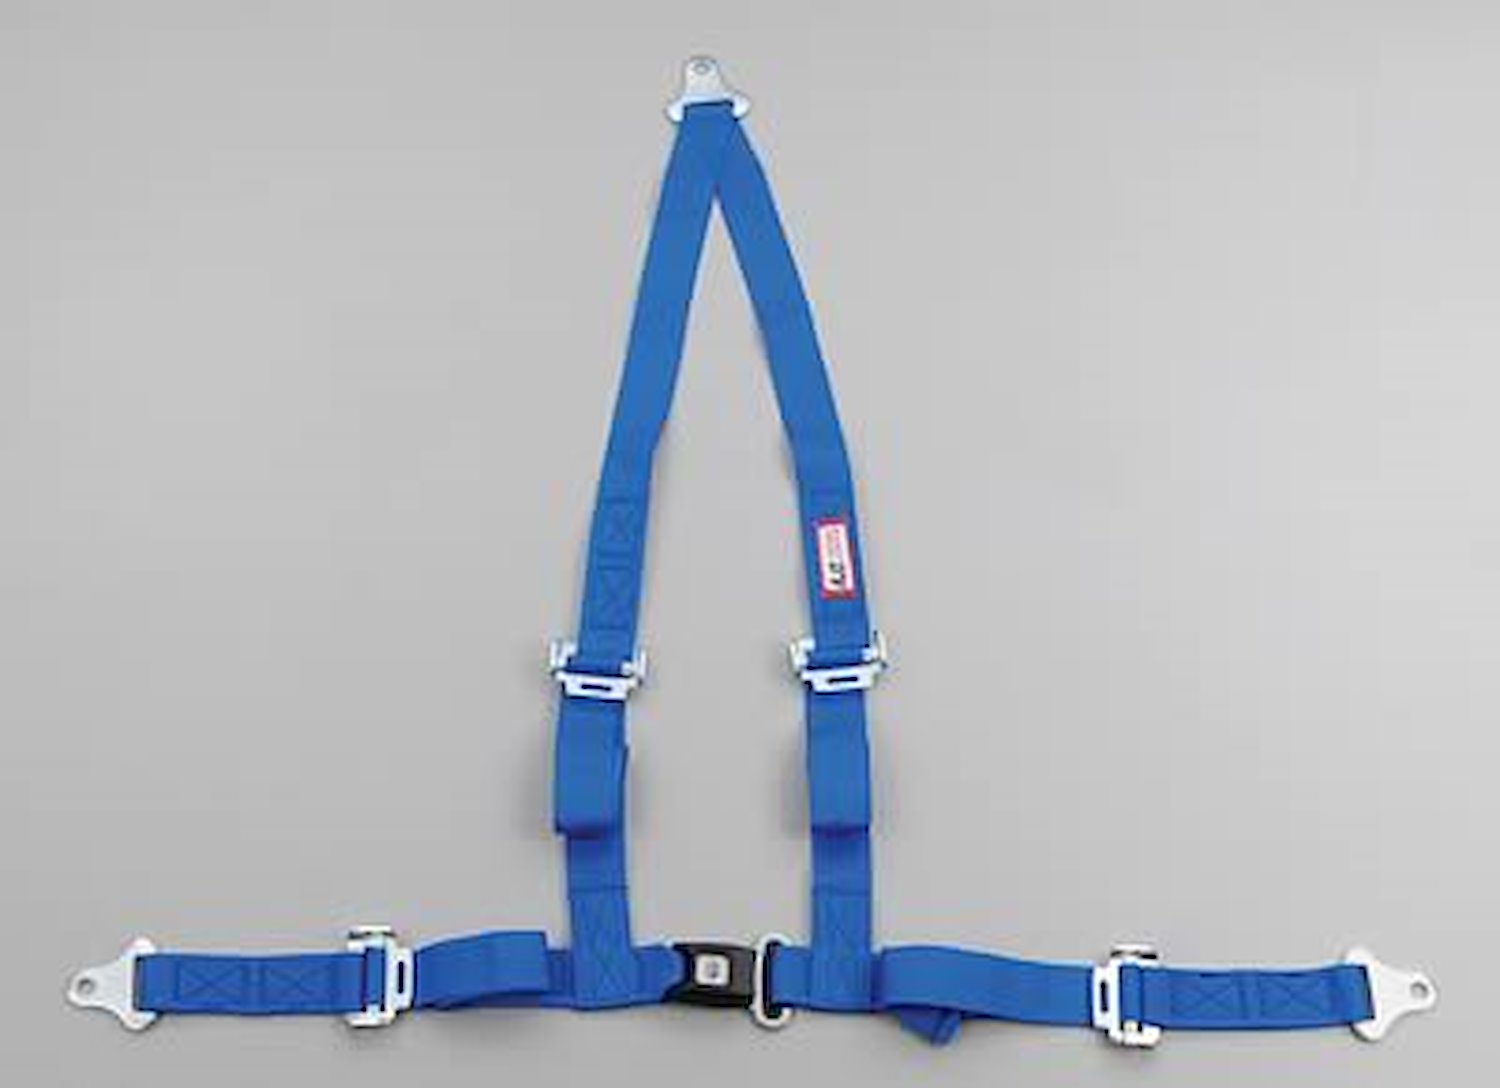 NON-SFI B&T HARNESS 2 PULL UP Lap Belt 2 S. H. Y FLOOR Mount ALL WRAP ENDS w/STERNUM STRAP BLUE